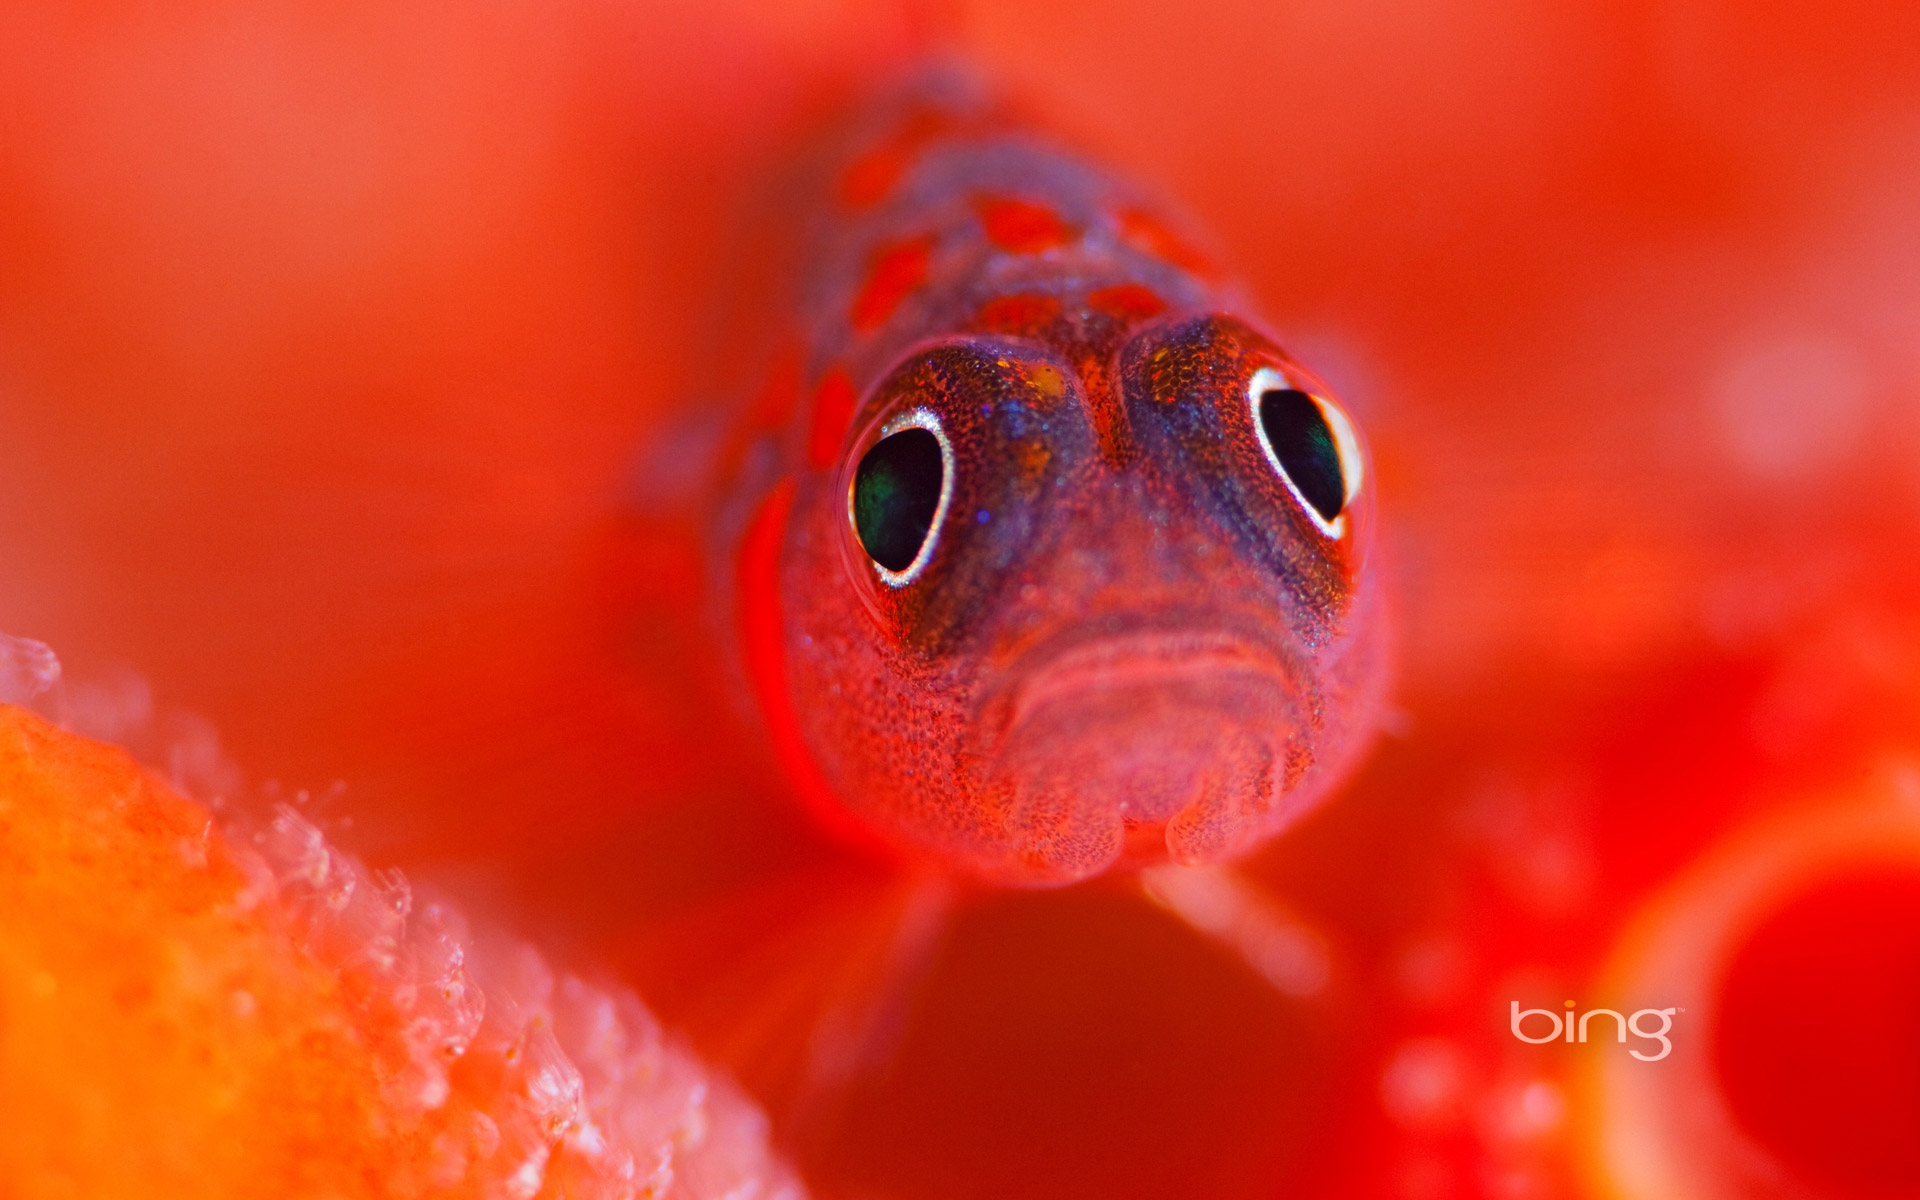 A flame goby guards her eggs in the Kaafu Atoll of The Maldives